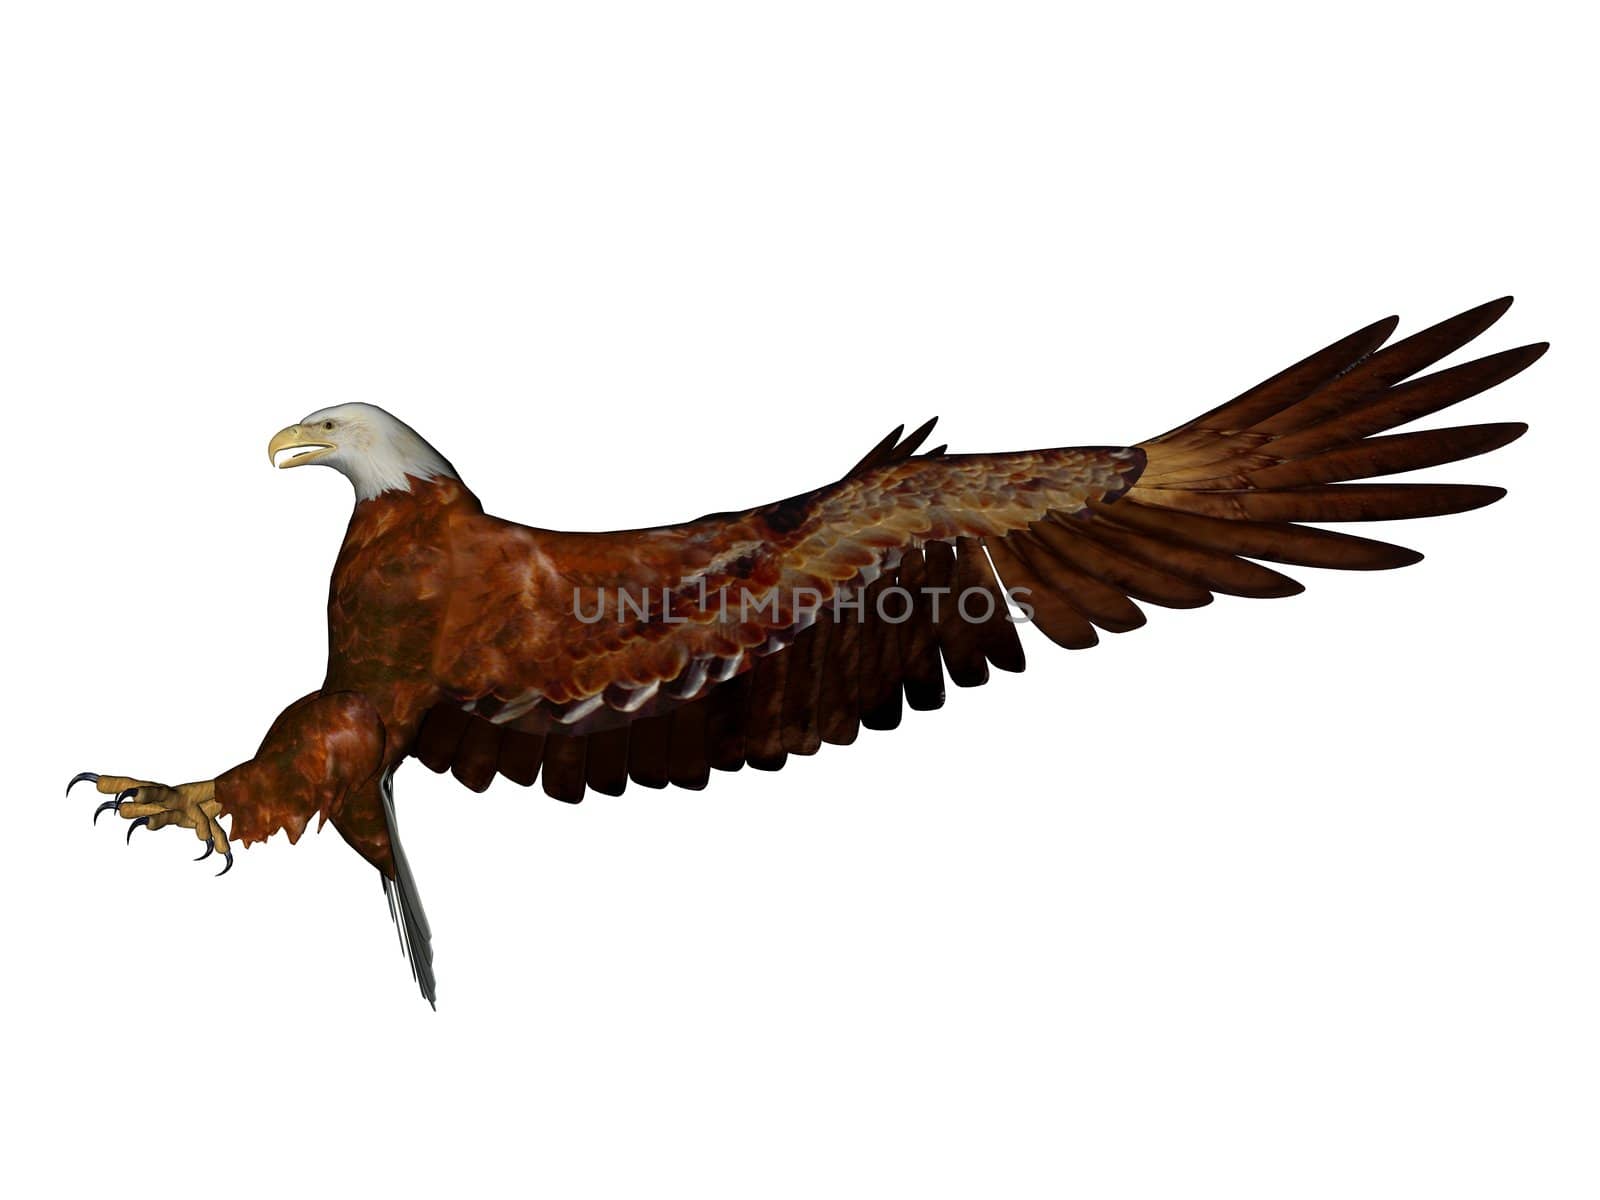 3D rendered eagle on white background isolated